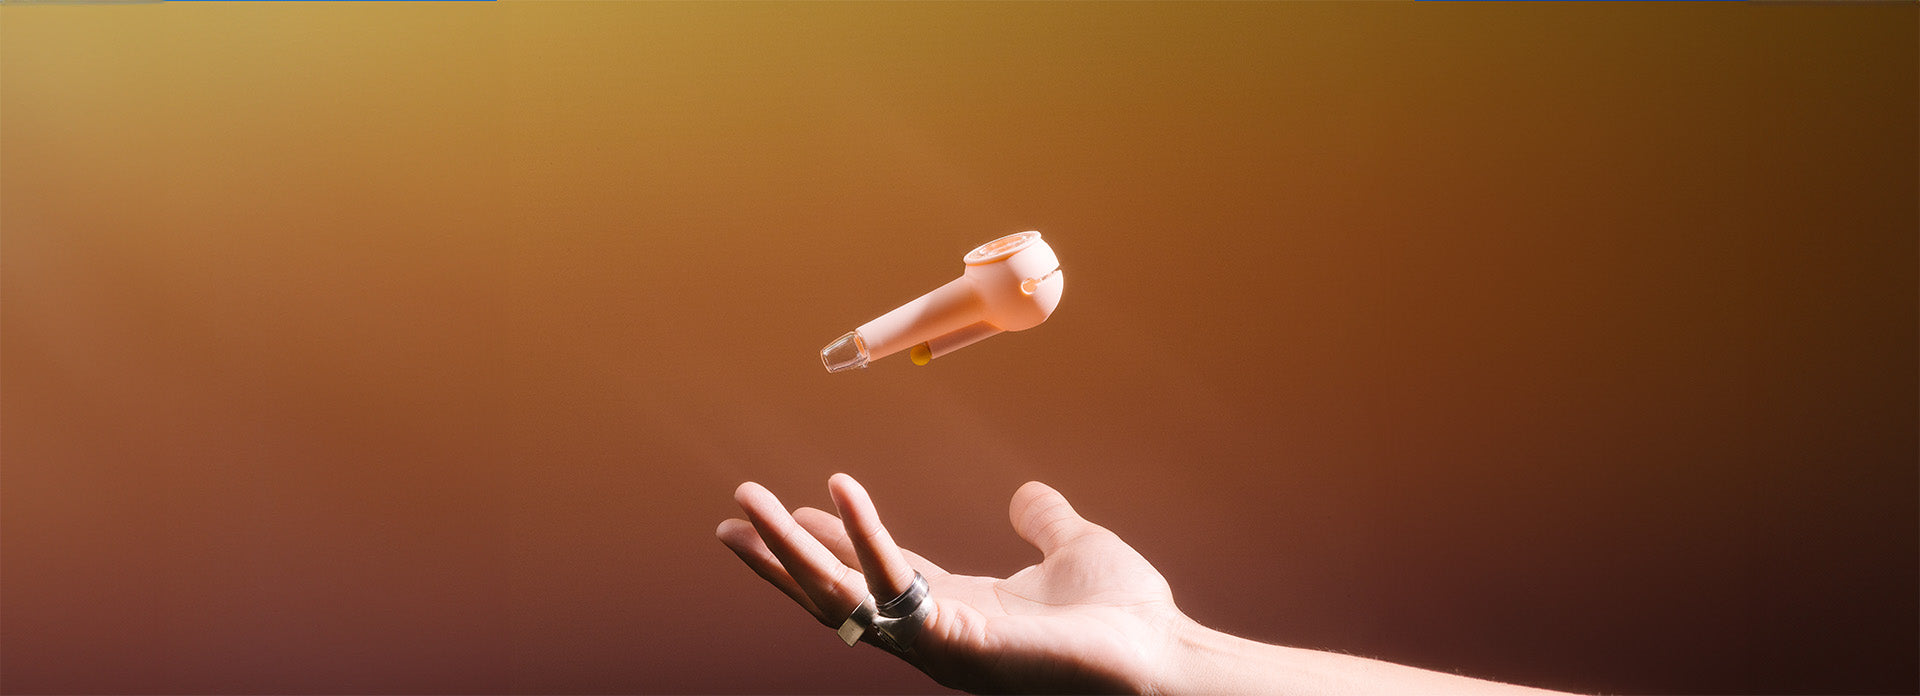 A hand magically lifting a weeday modular pipe, seemingly floating in the air against an orange gradient background.